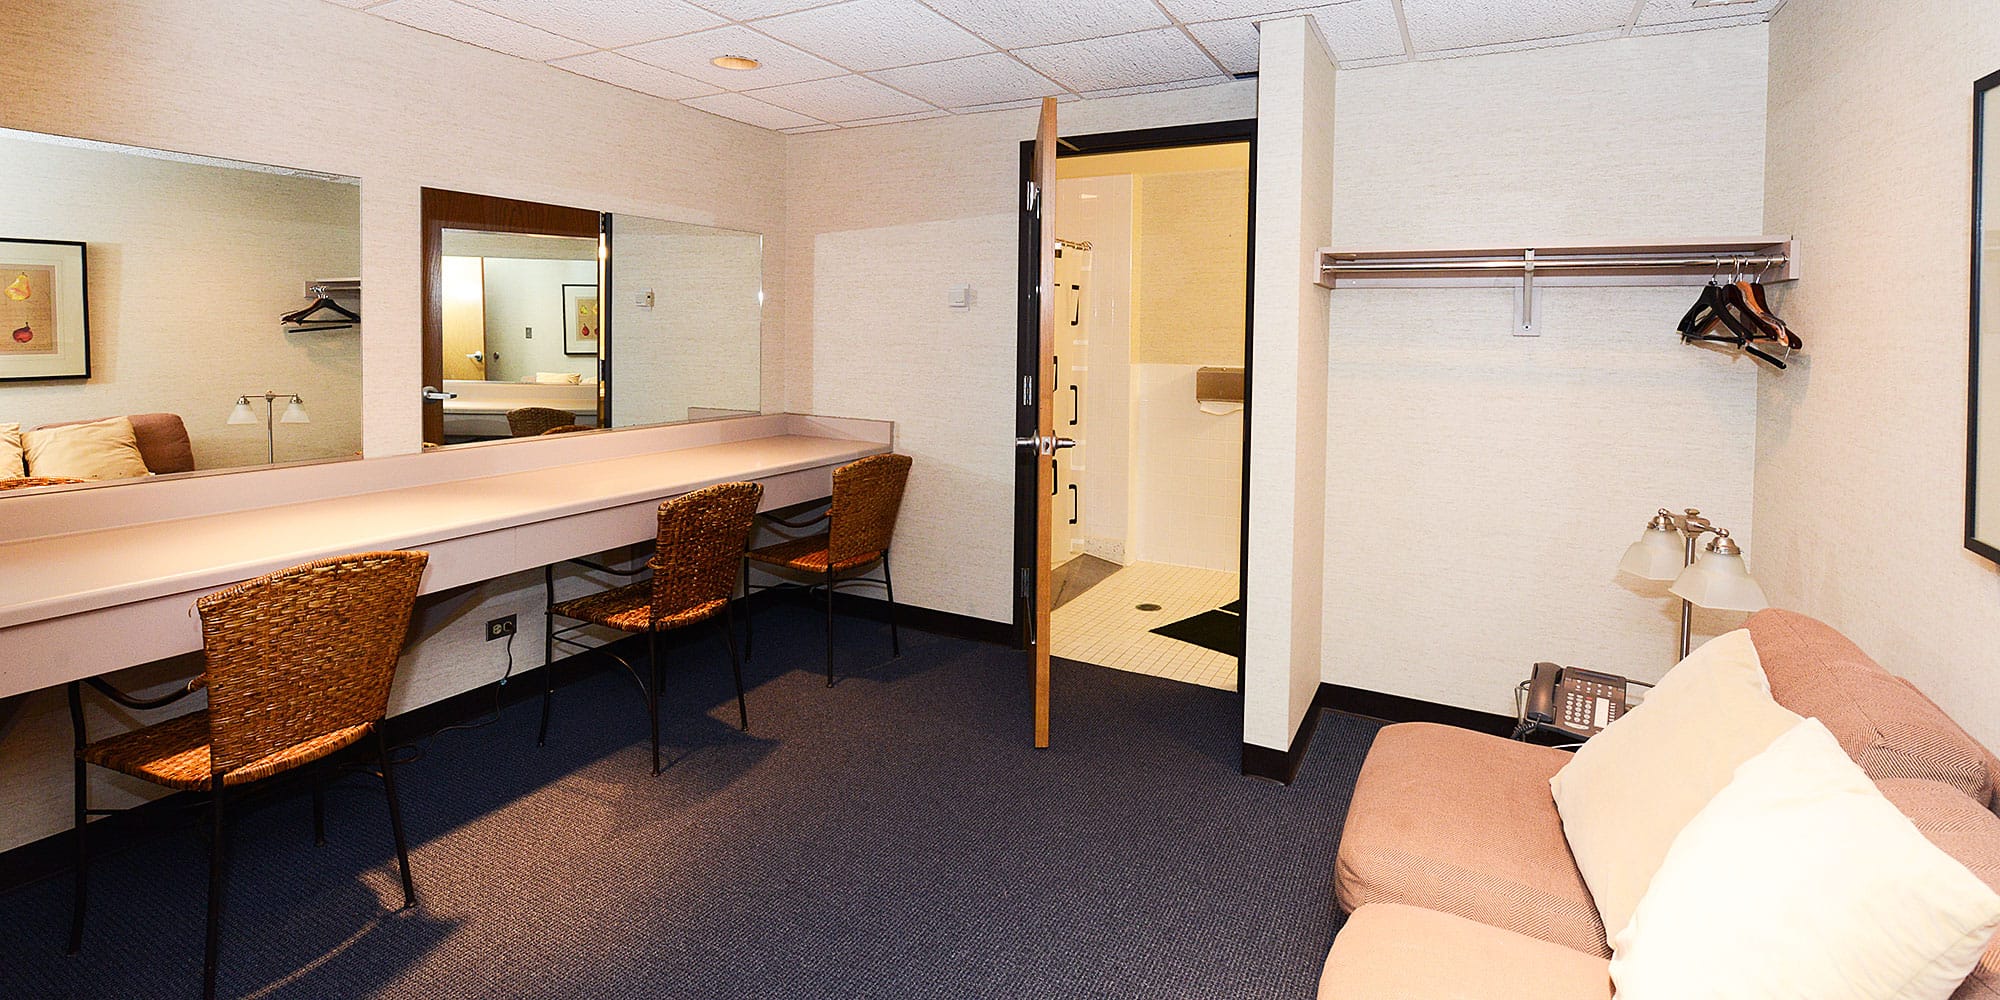 Large dressing room with several chairs and couch